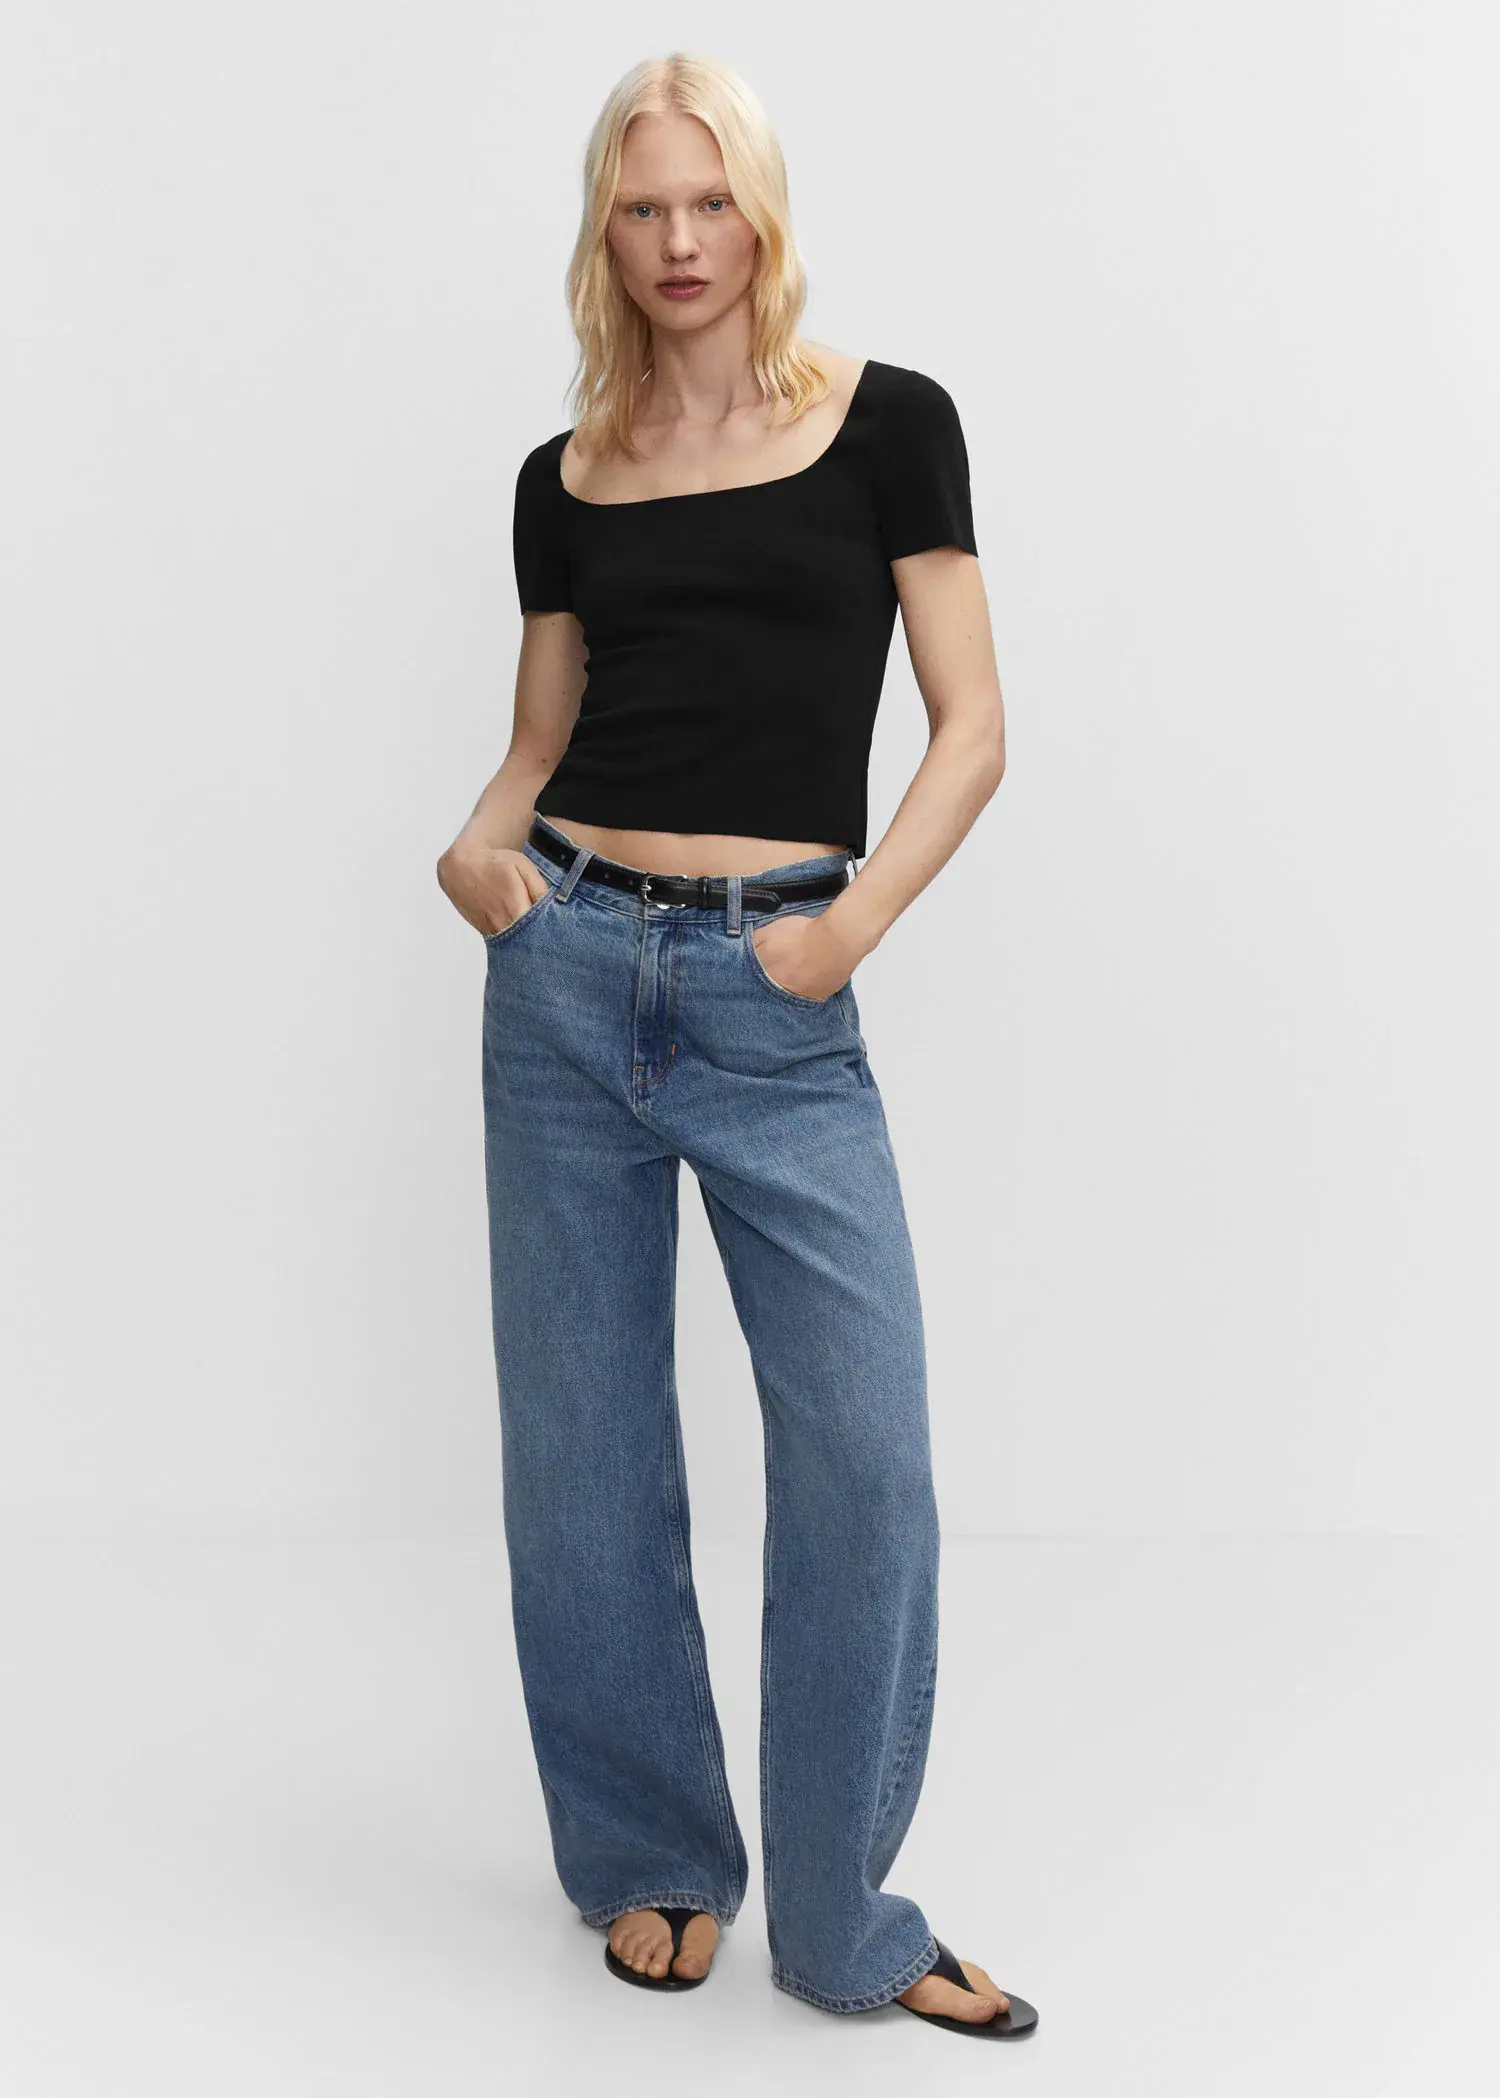 Mango Square neck t-shirt. a woman in black shirt and blue jeans. 